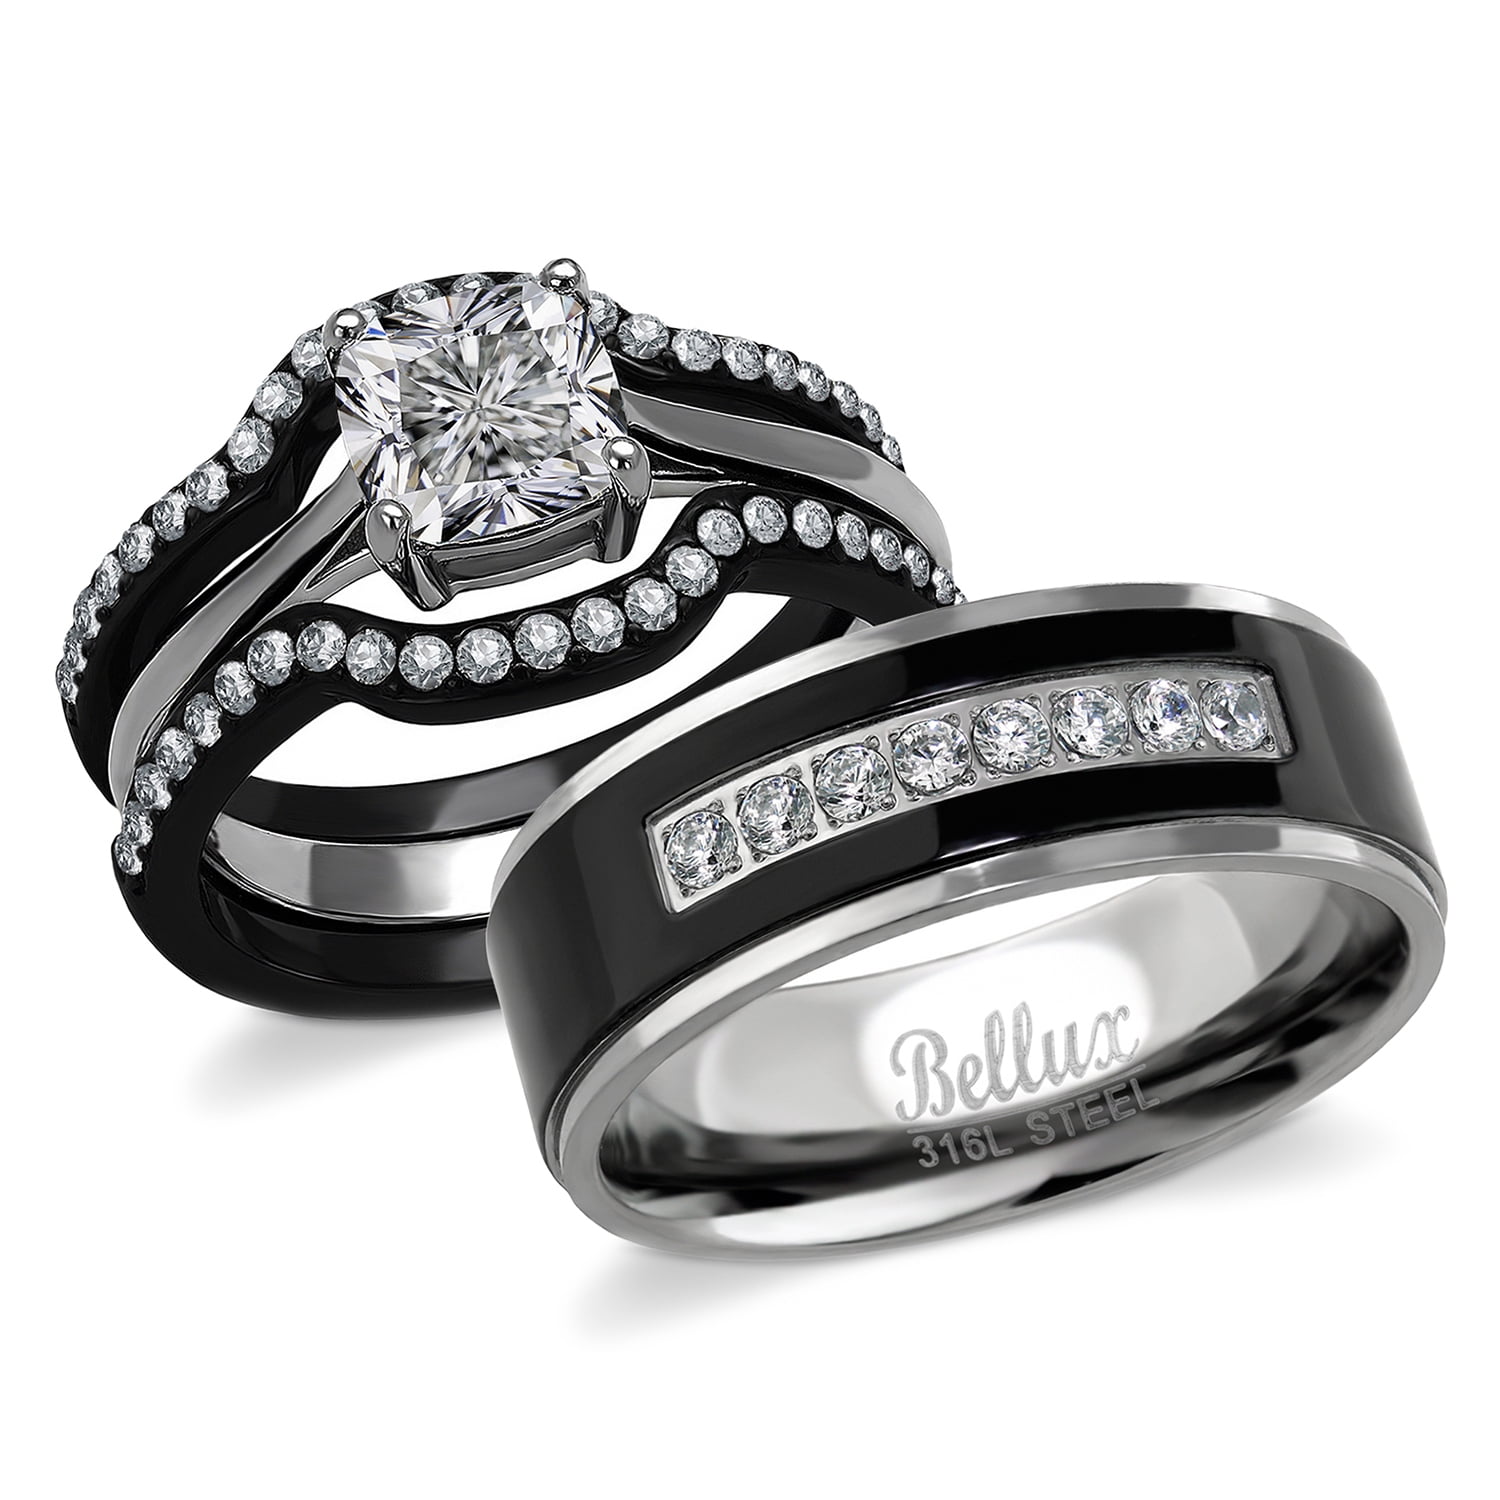 3 PCS HIS HERS STAINLESS STEEL MATCHING WEDDING BRIDAL MATCHING RING SET CZ NEW 